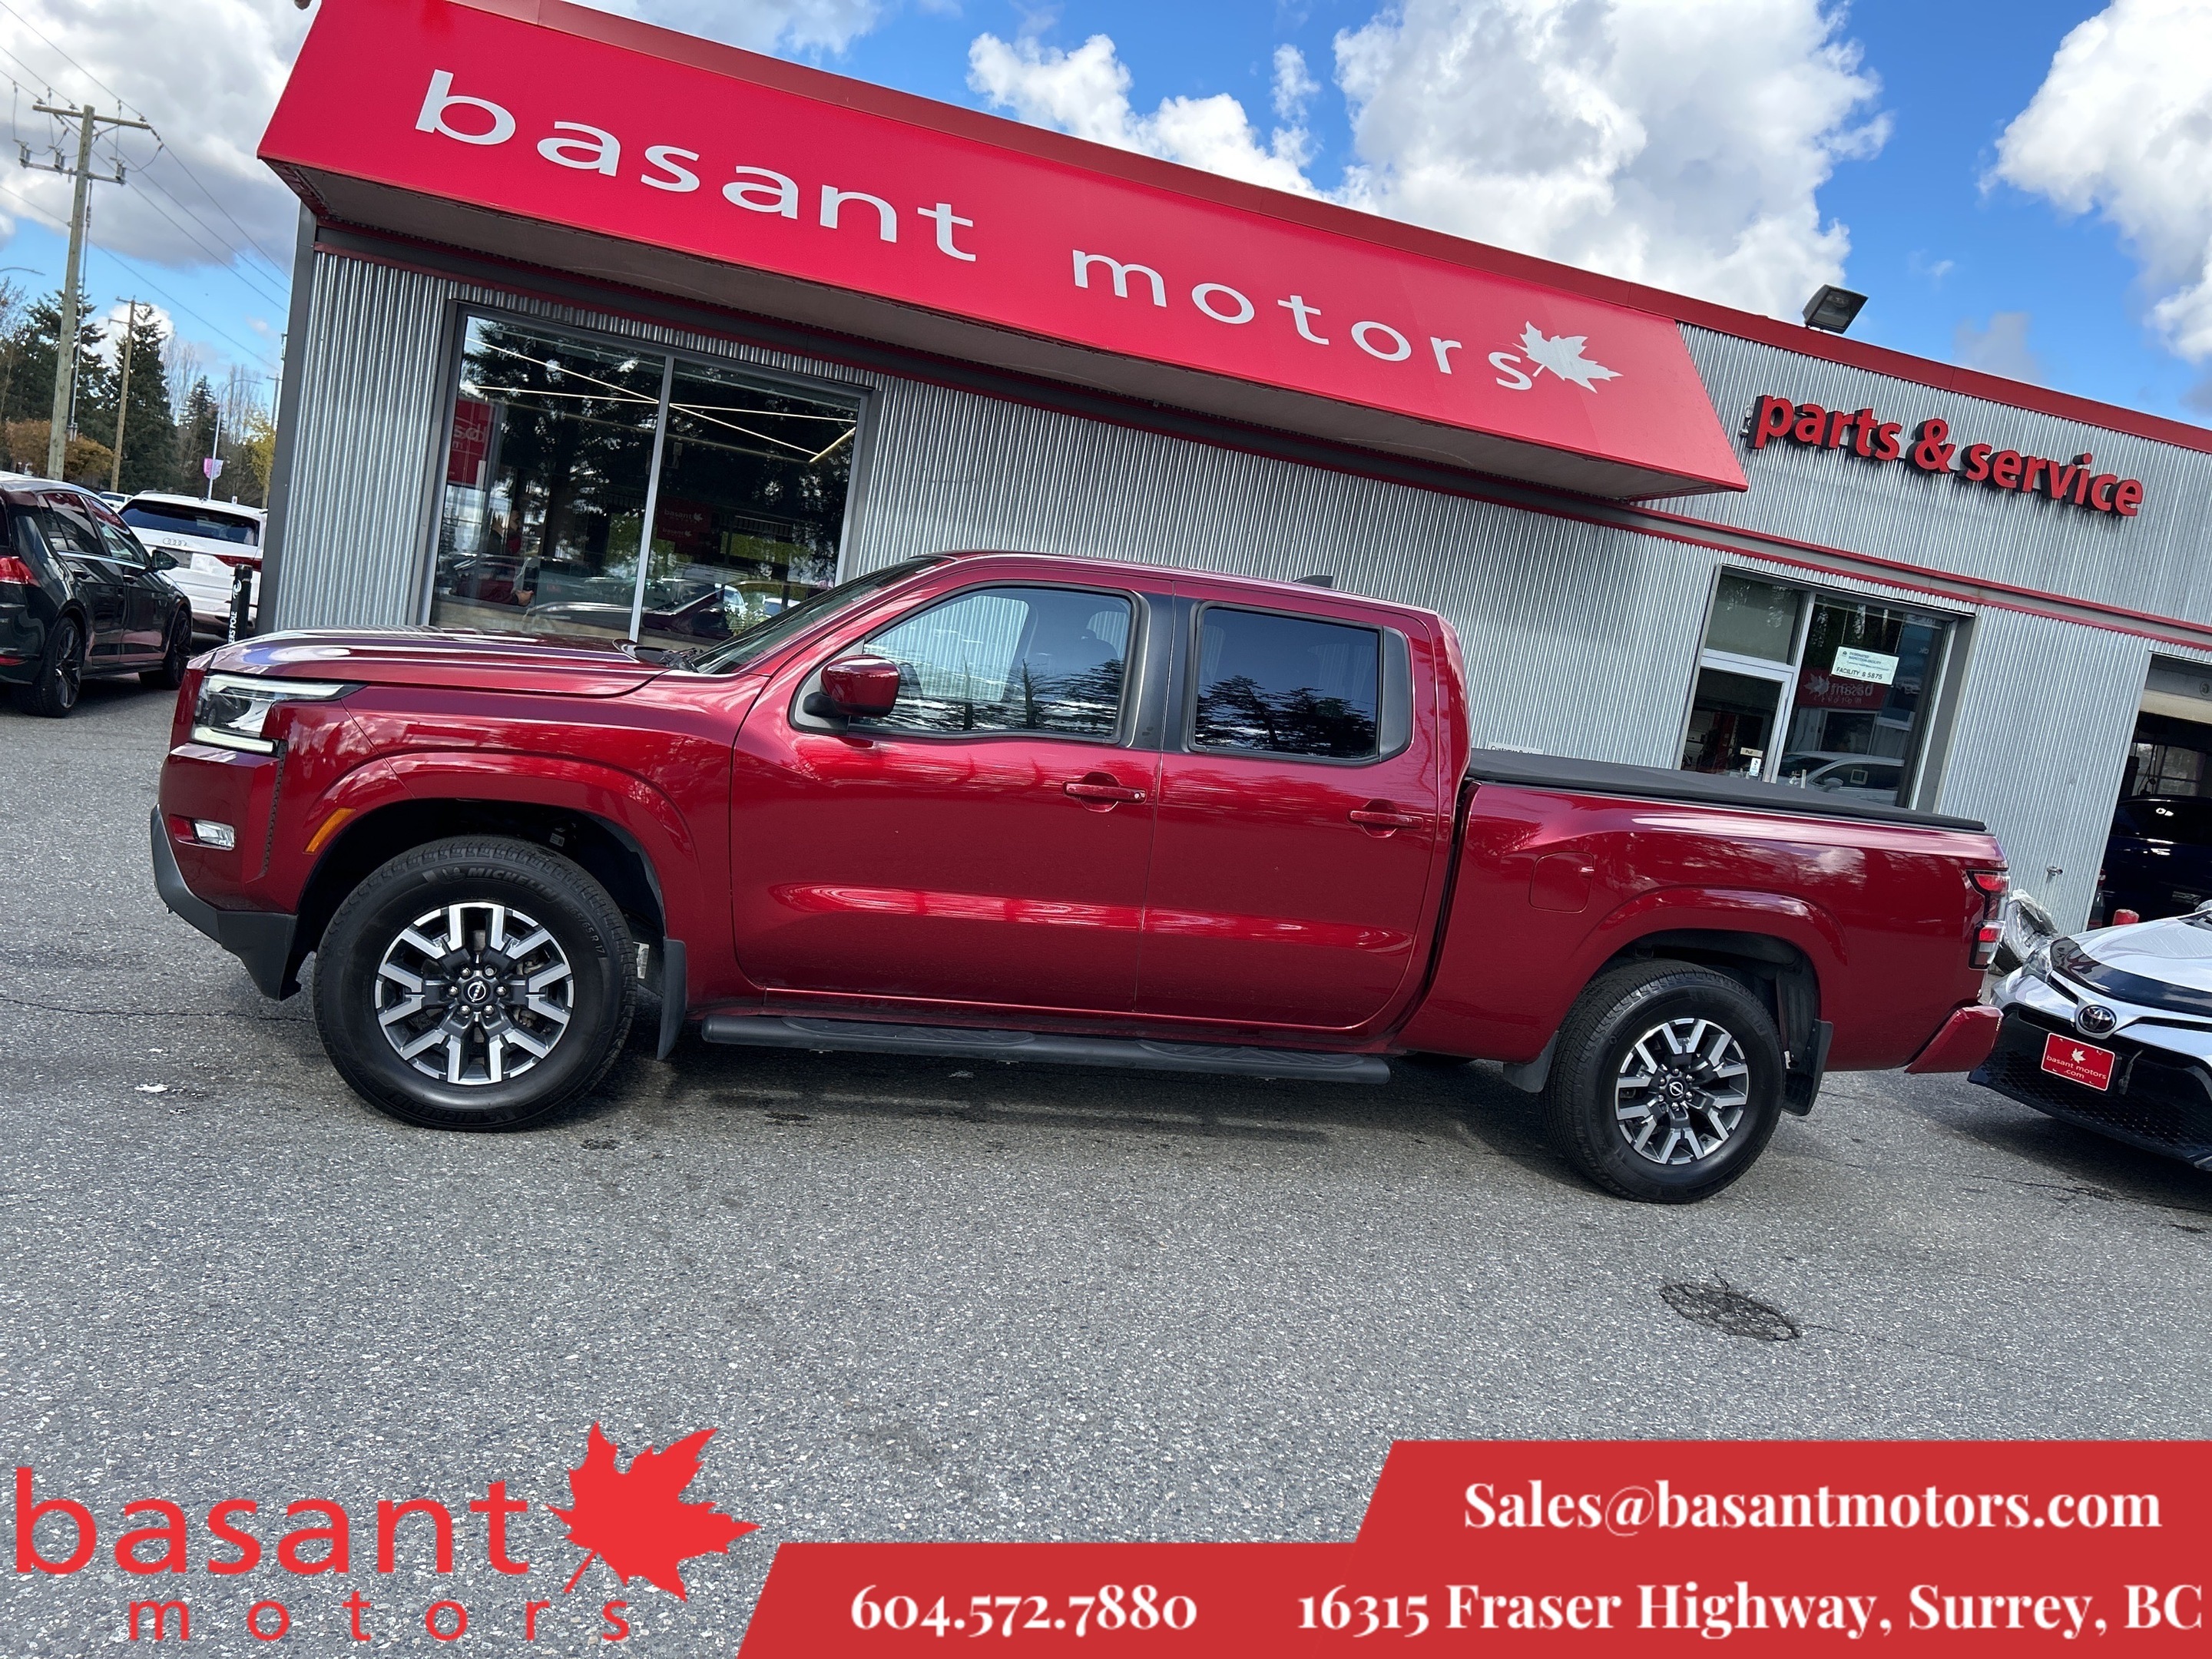 2022 Nissan Frontier SV, Low KMs, Heated Seats/Steering, Tonneau Cover!